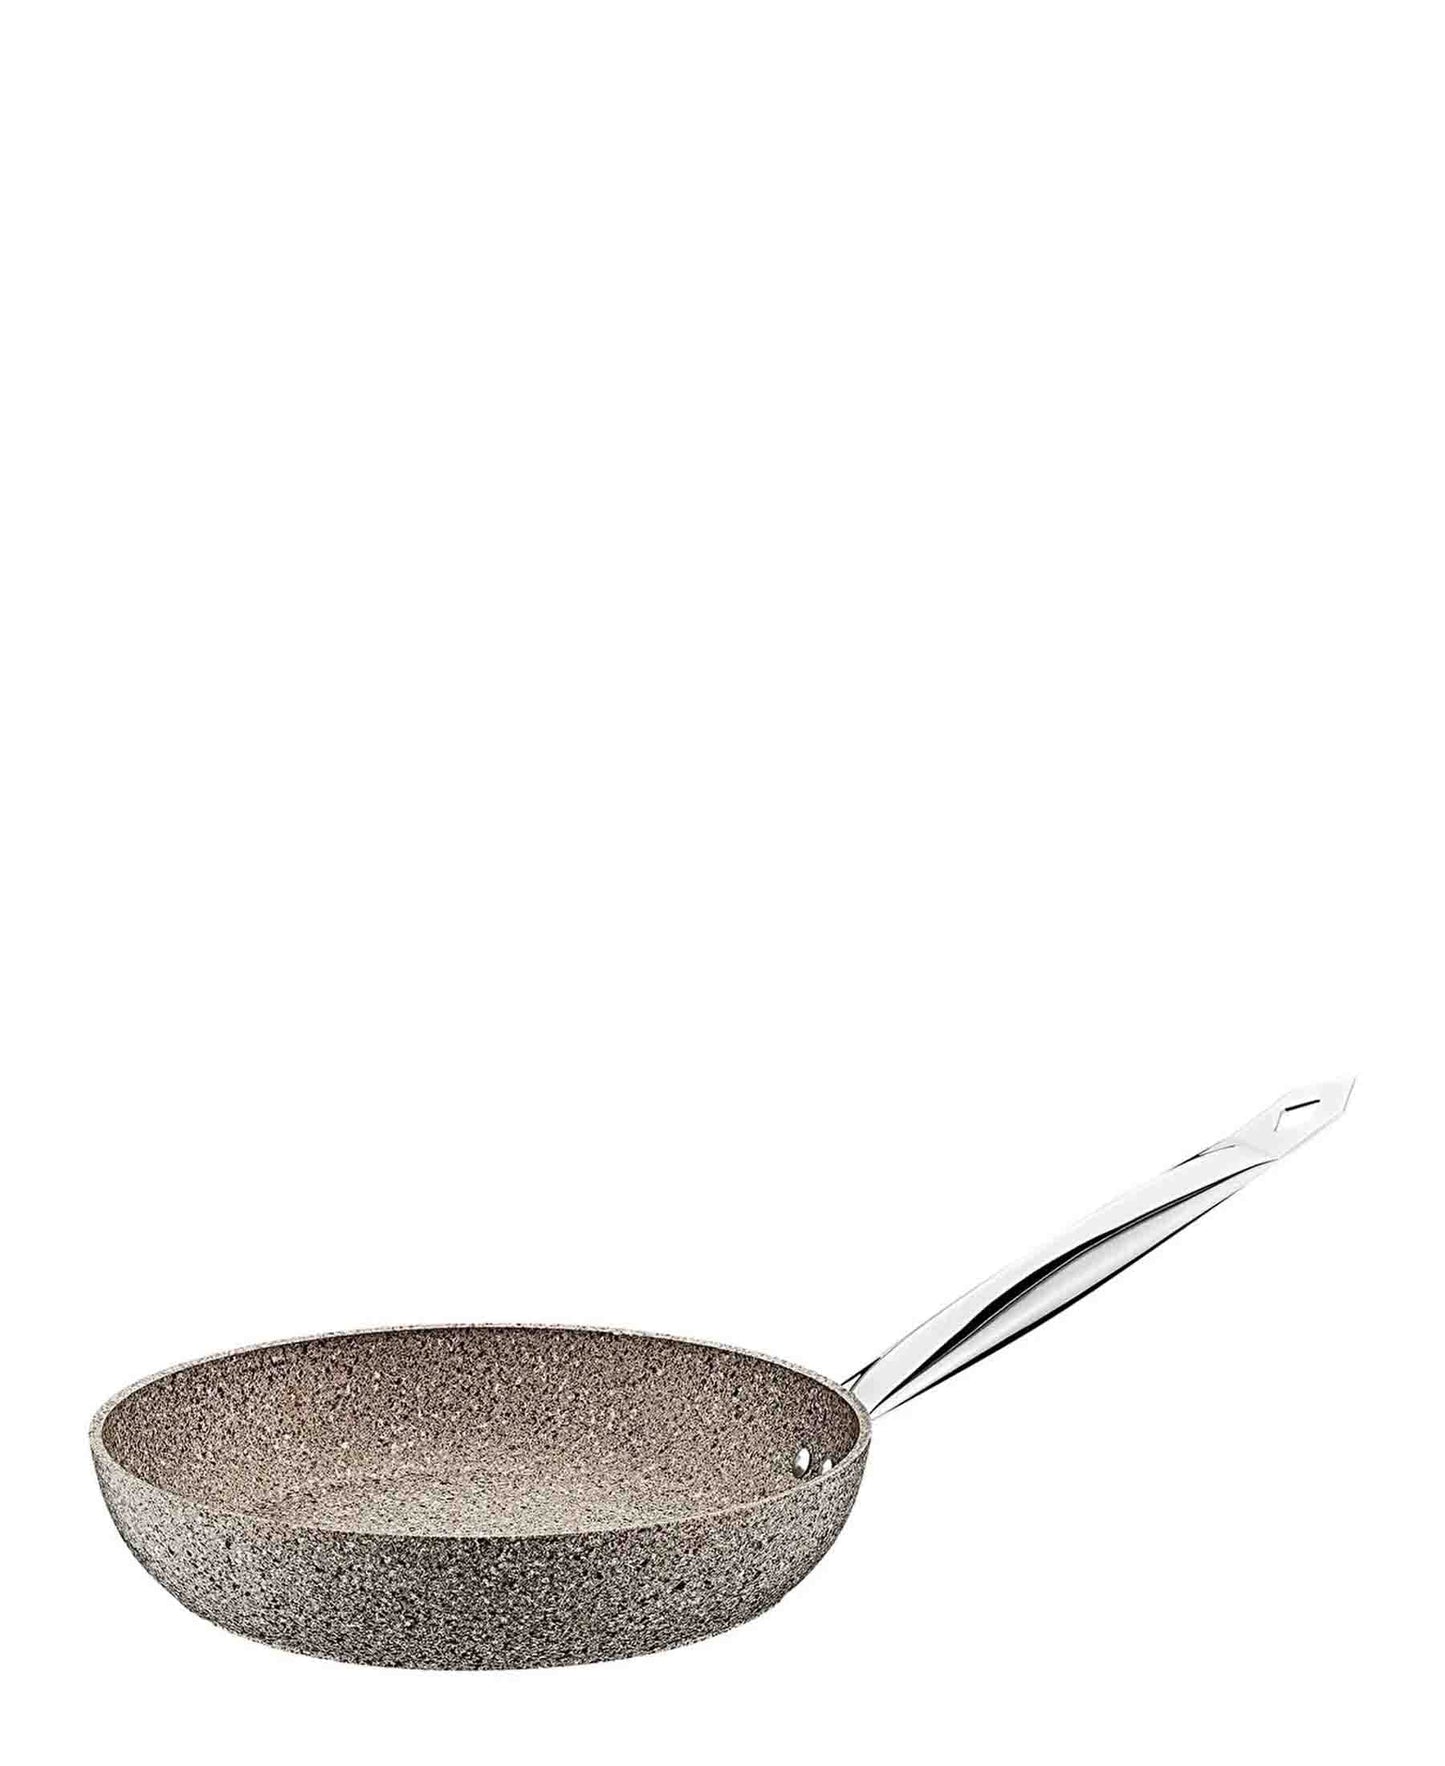 OMS Granite 30cm Non Stick Induction Fry Pan - Beige